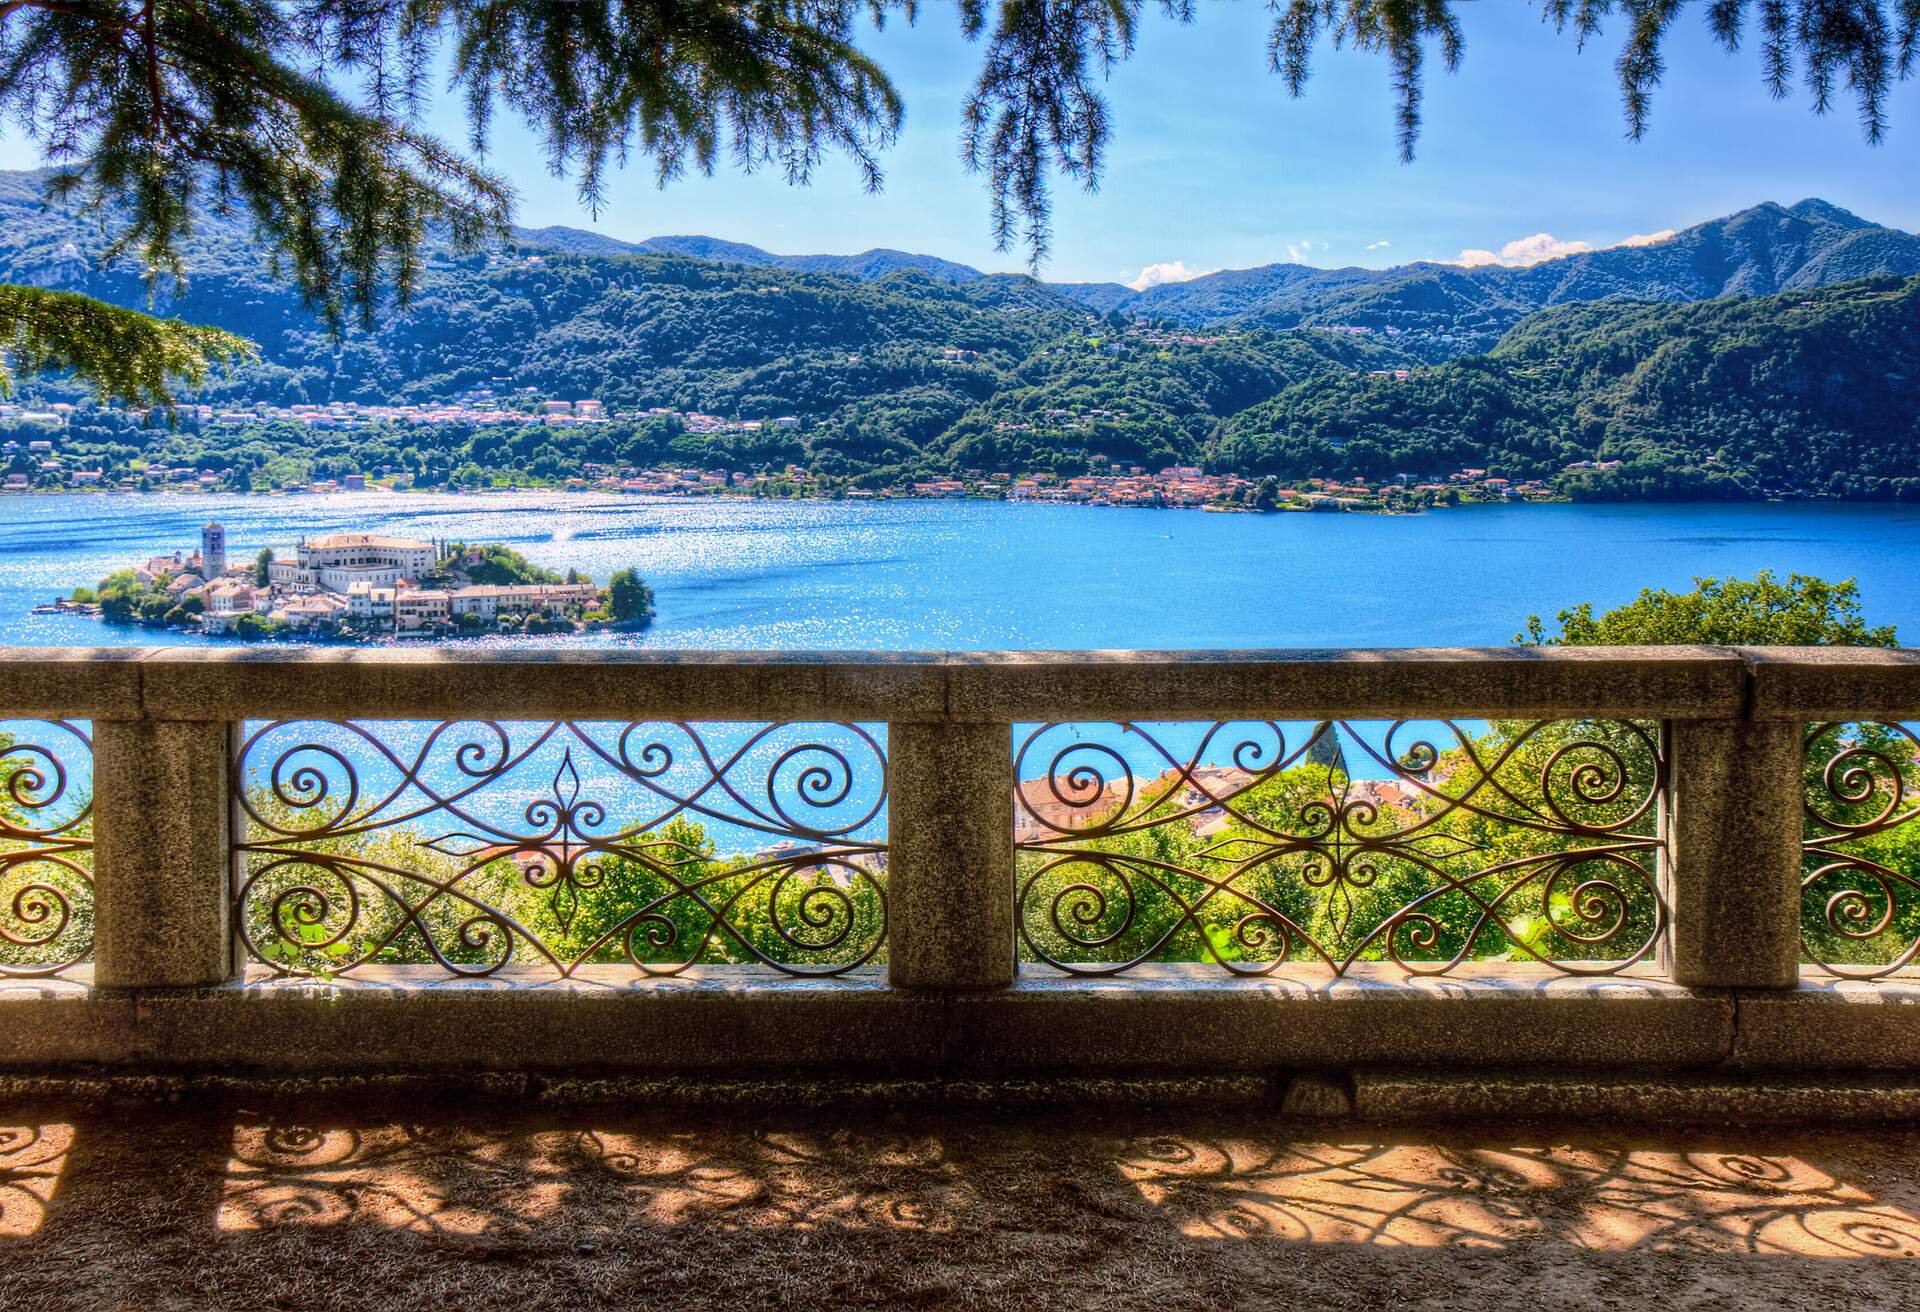 DEST_ITALY_SAN-GUILIO-ISLAND_LAKE-ORTA_GettyImages-150678129